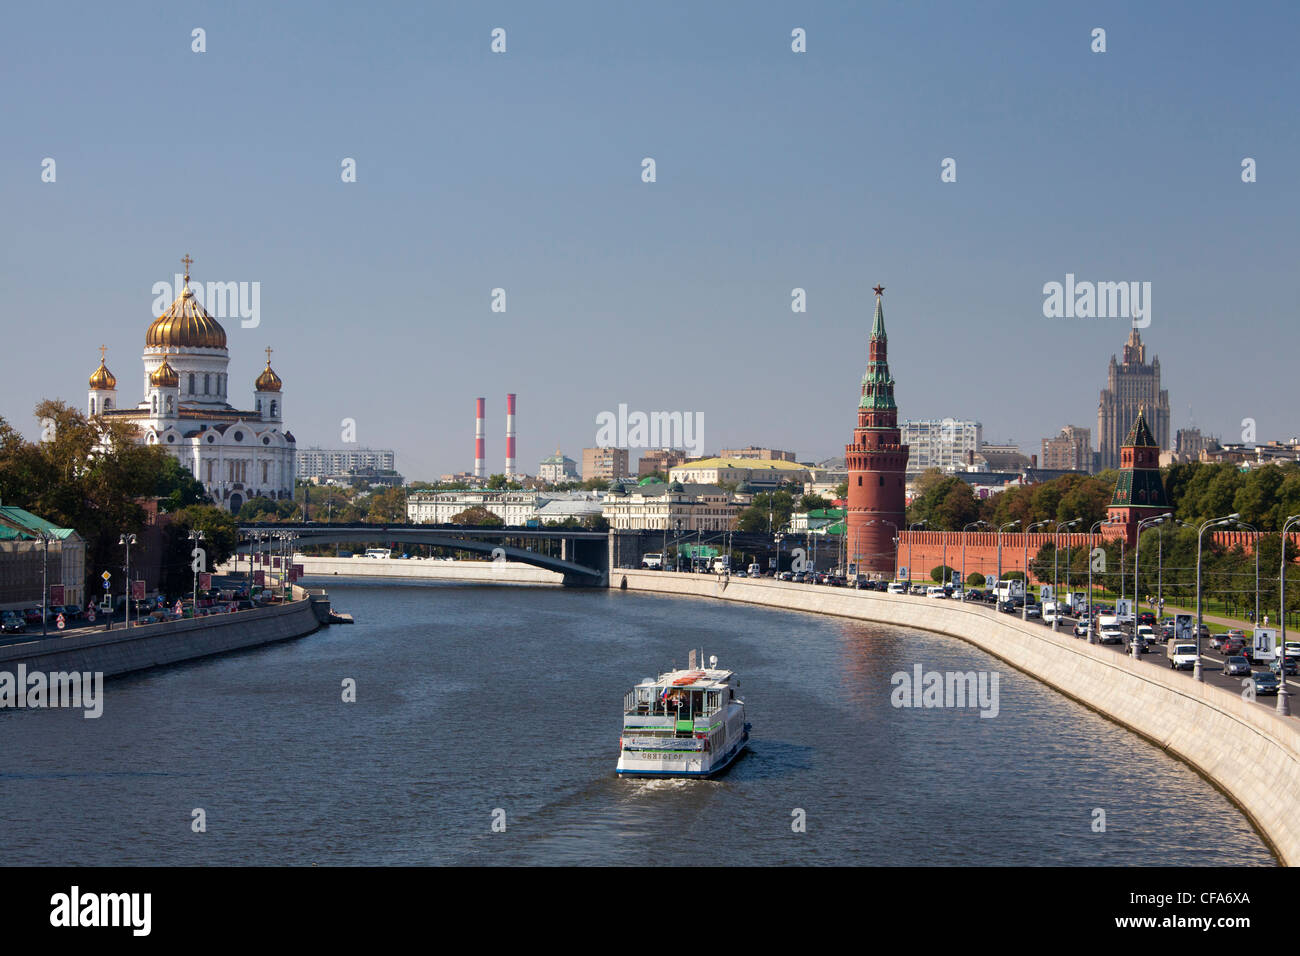 Russia, Europe, Moscow, City, Moscow river, Moscow river, Church, Christ the Saviour, Kremlin, boat Stock Photo